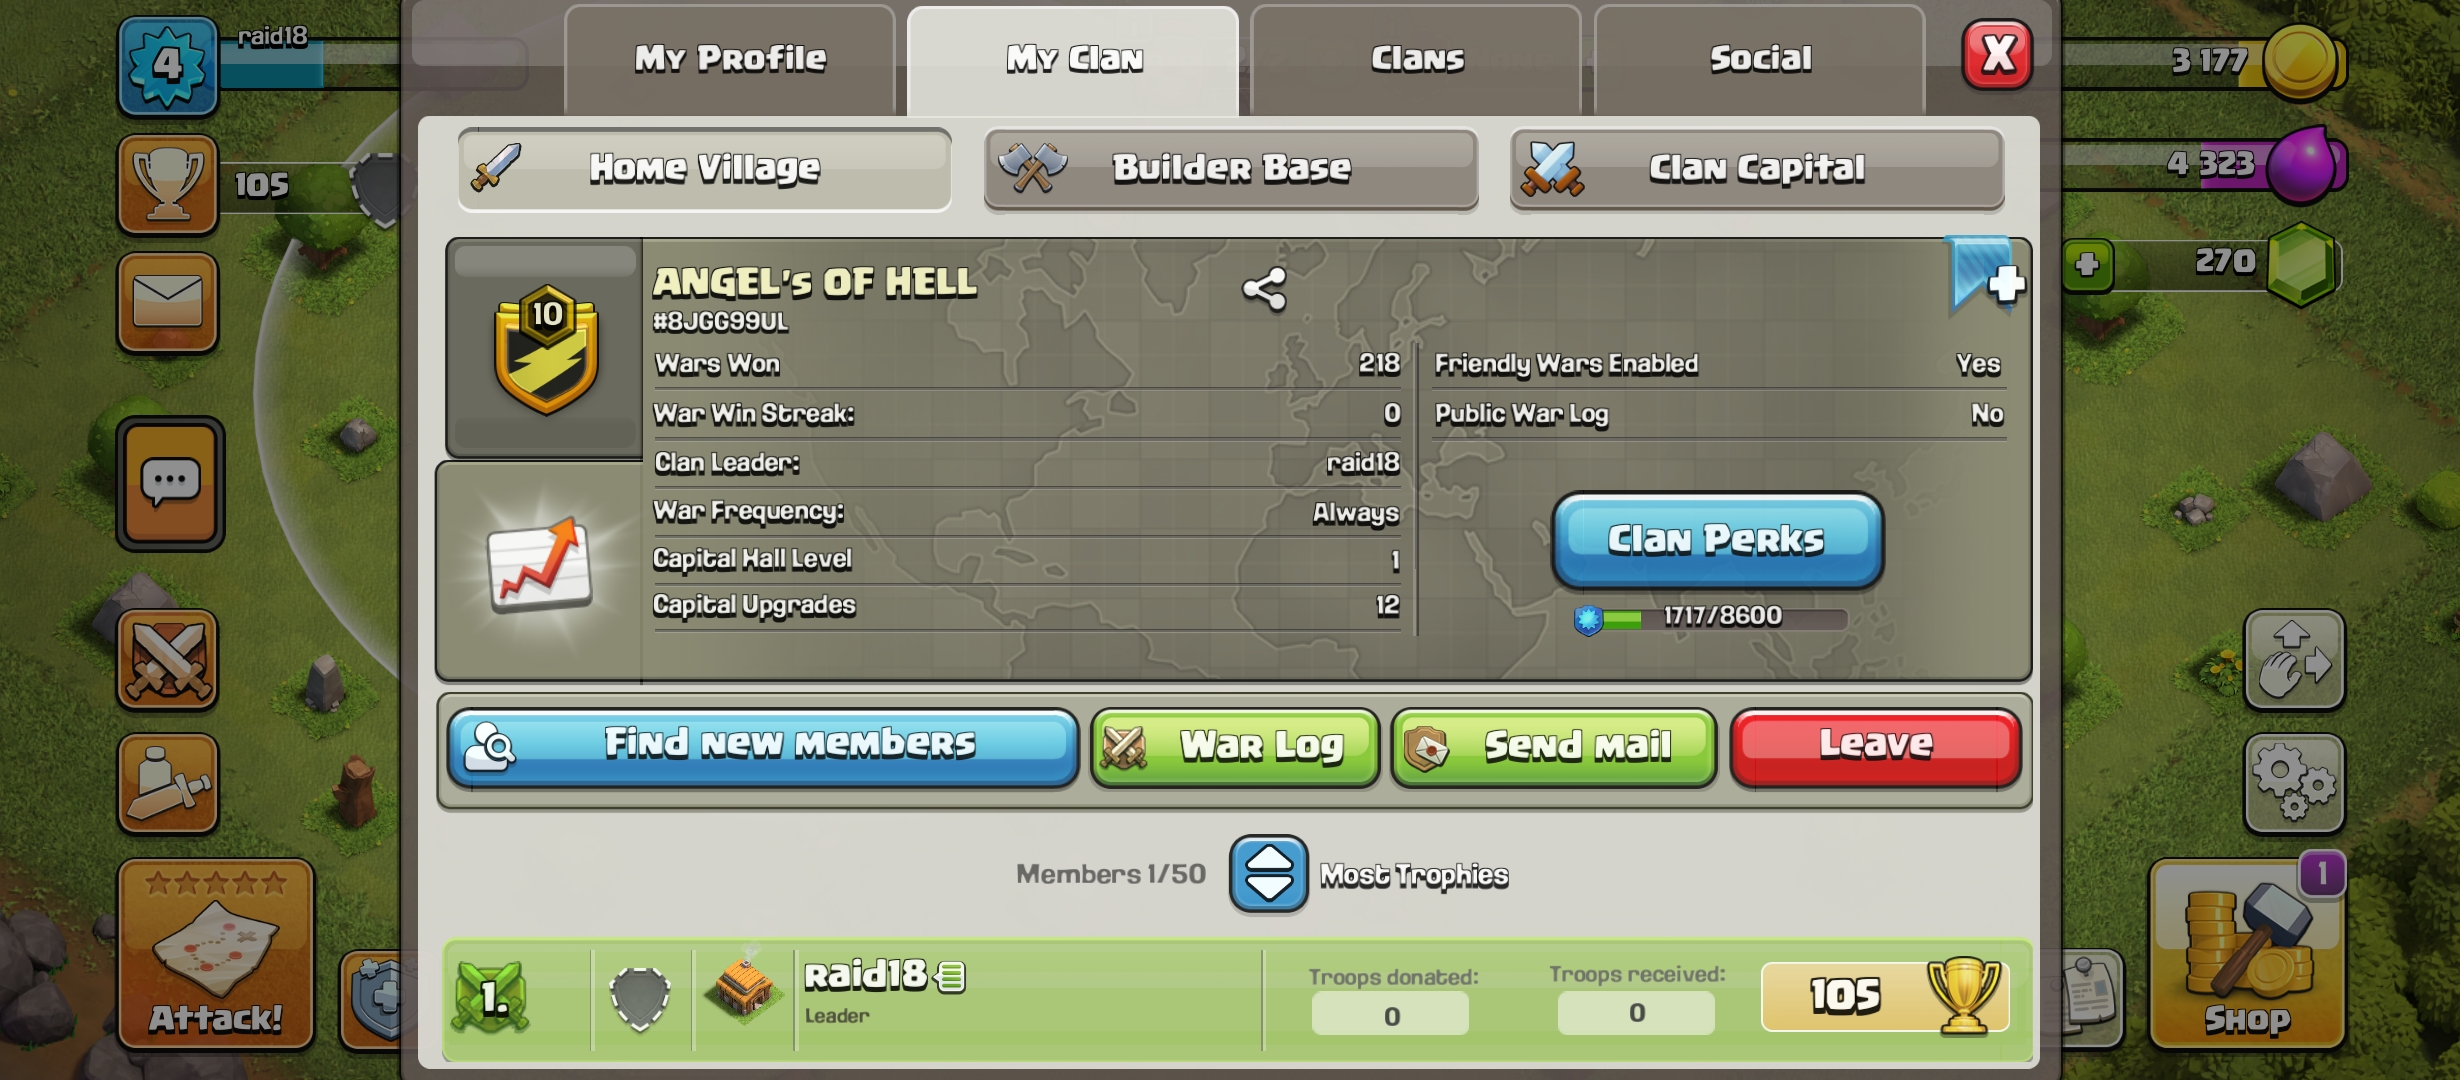 Clan level 10 | Clan Name : ANGEL' s OF HELL | Capital Hall 1 |unranked